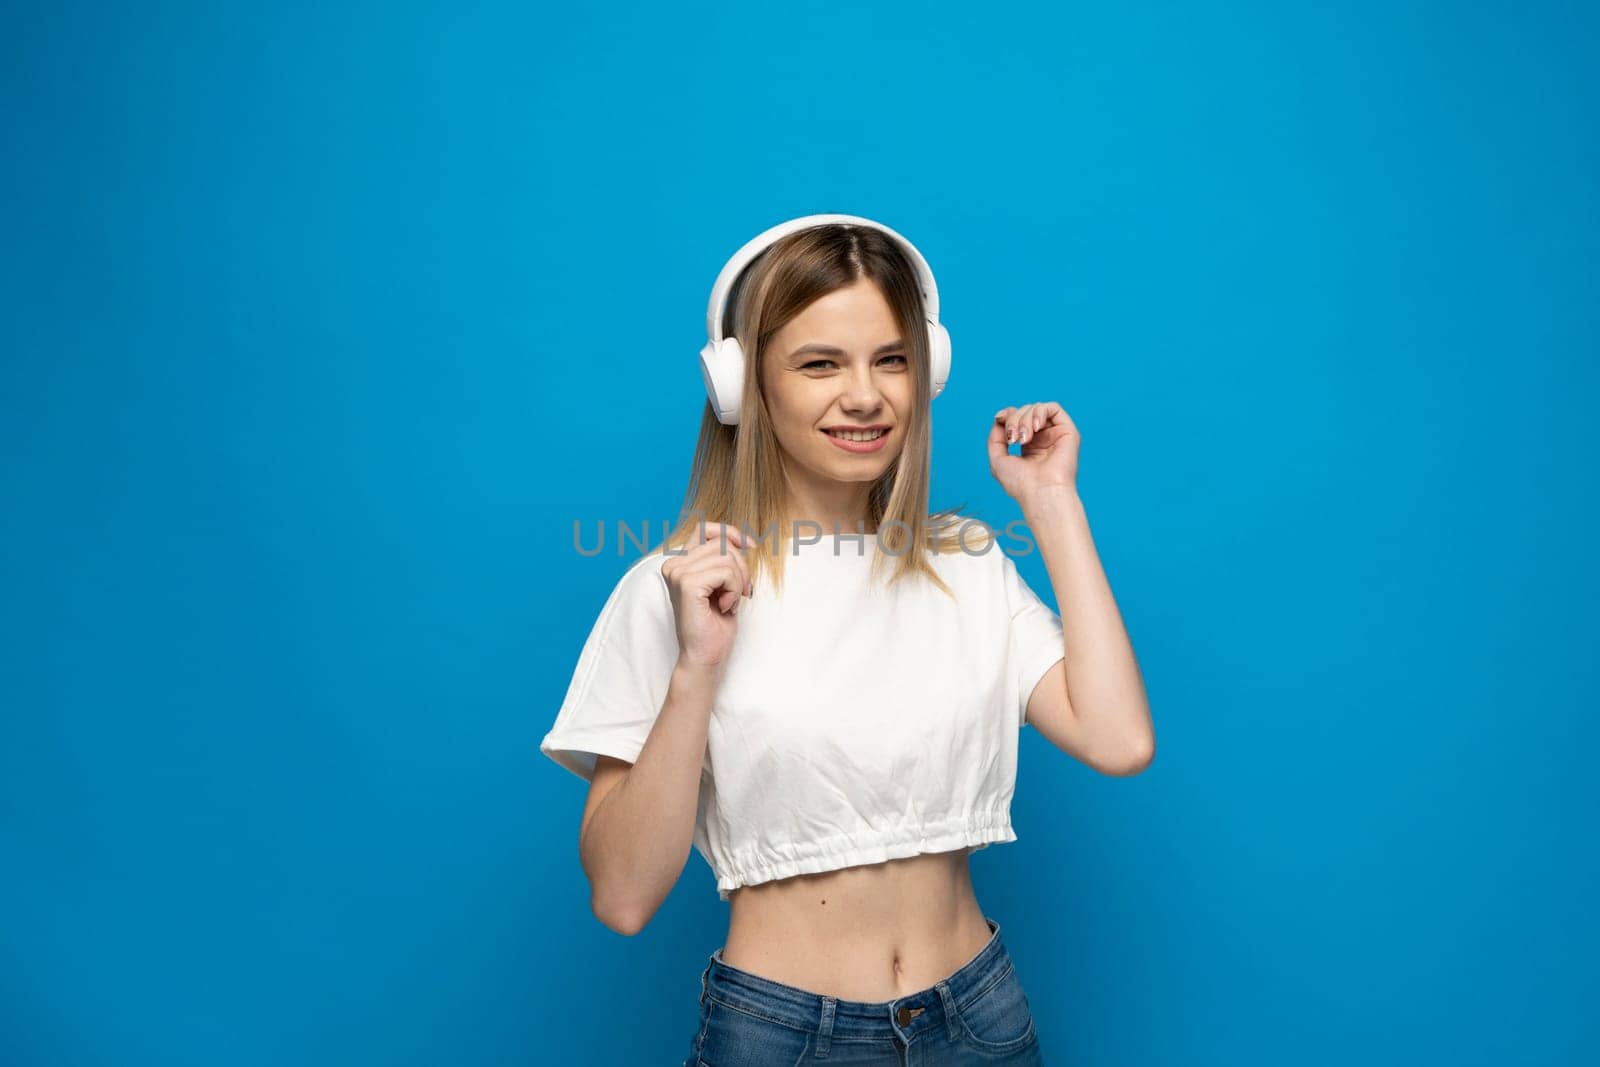 Cheerful young pretty girl smiling while listening music in headphones and dancing on blue background